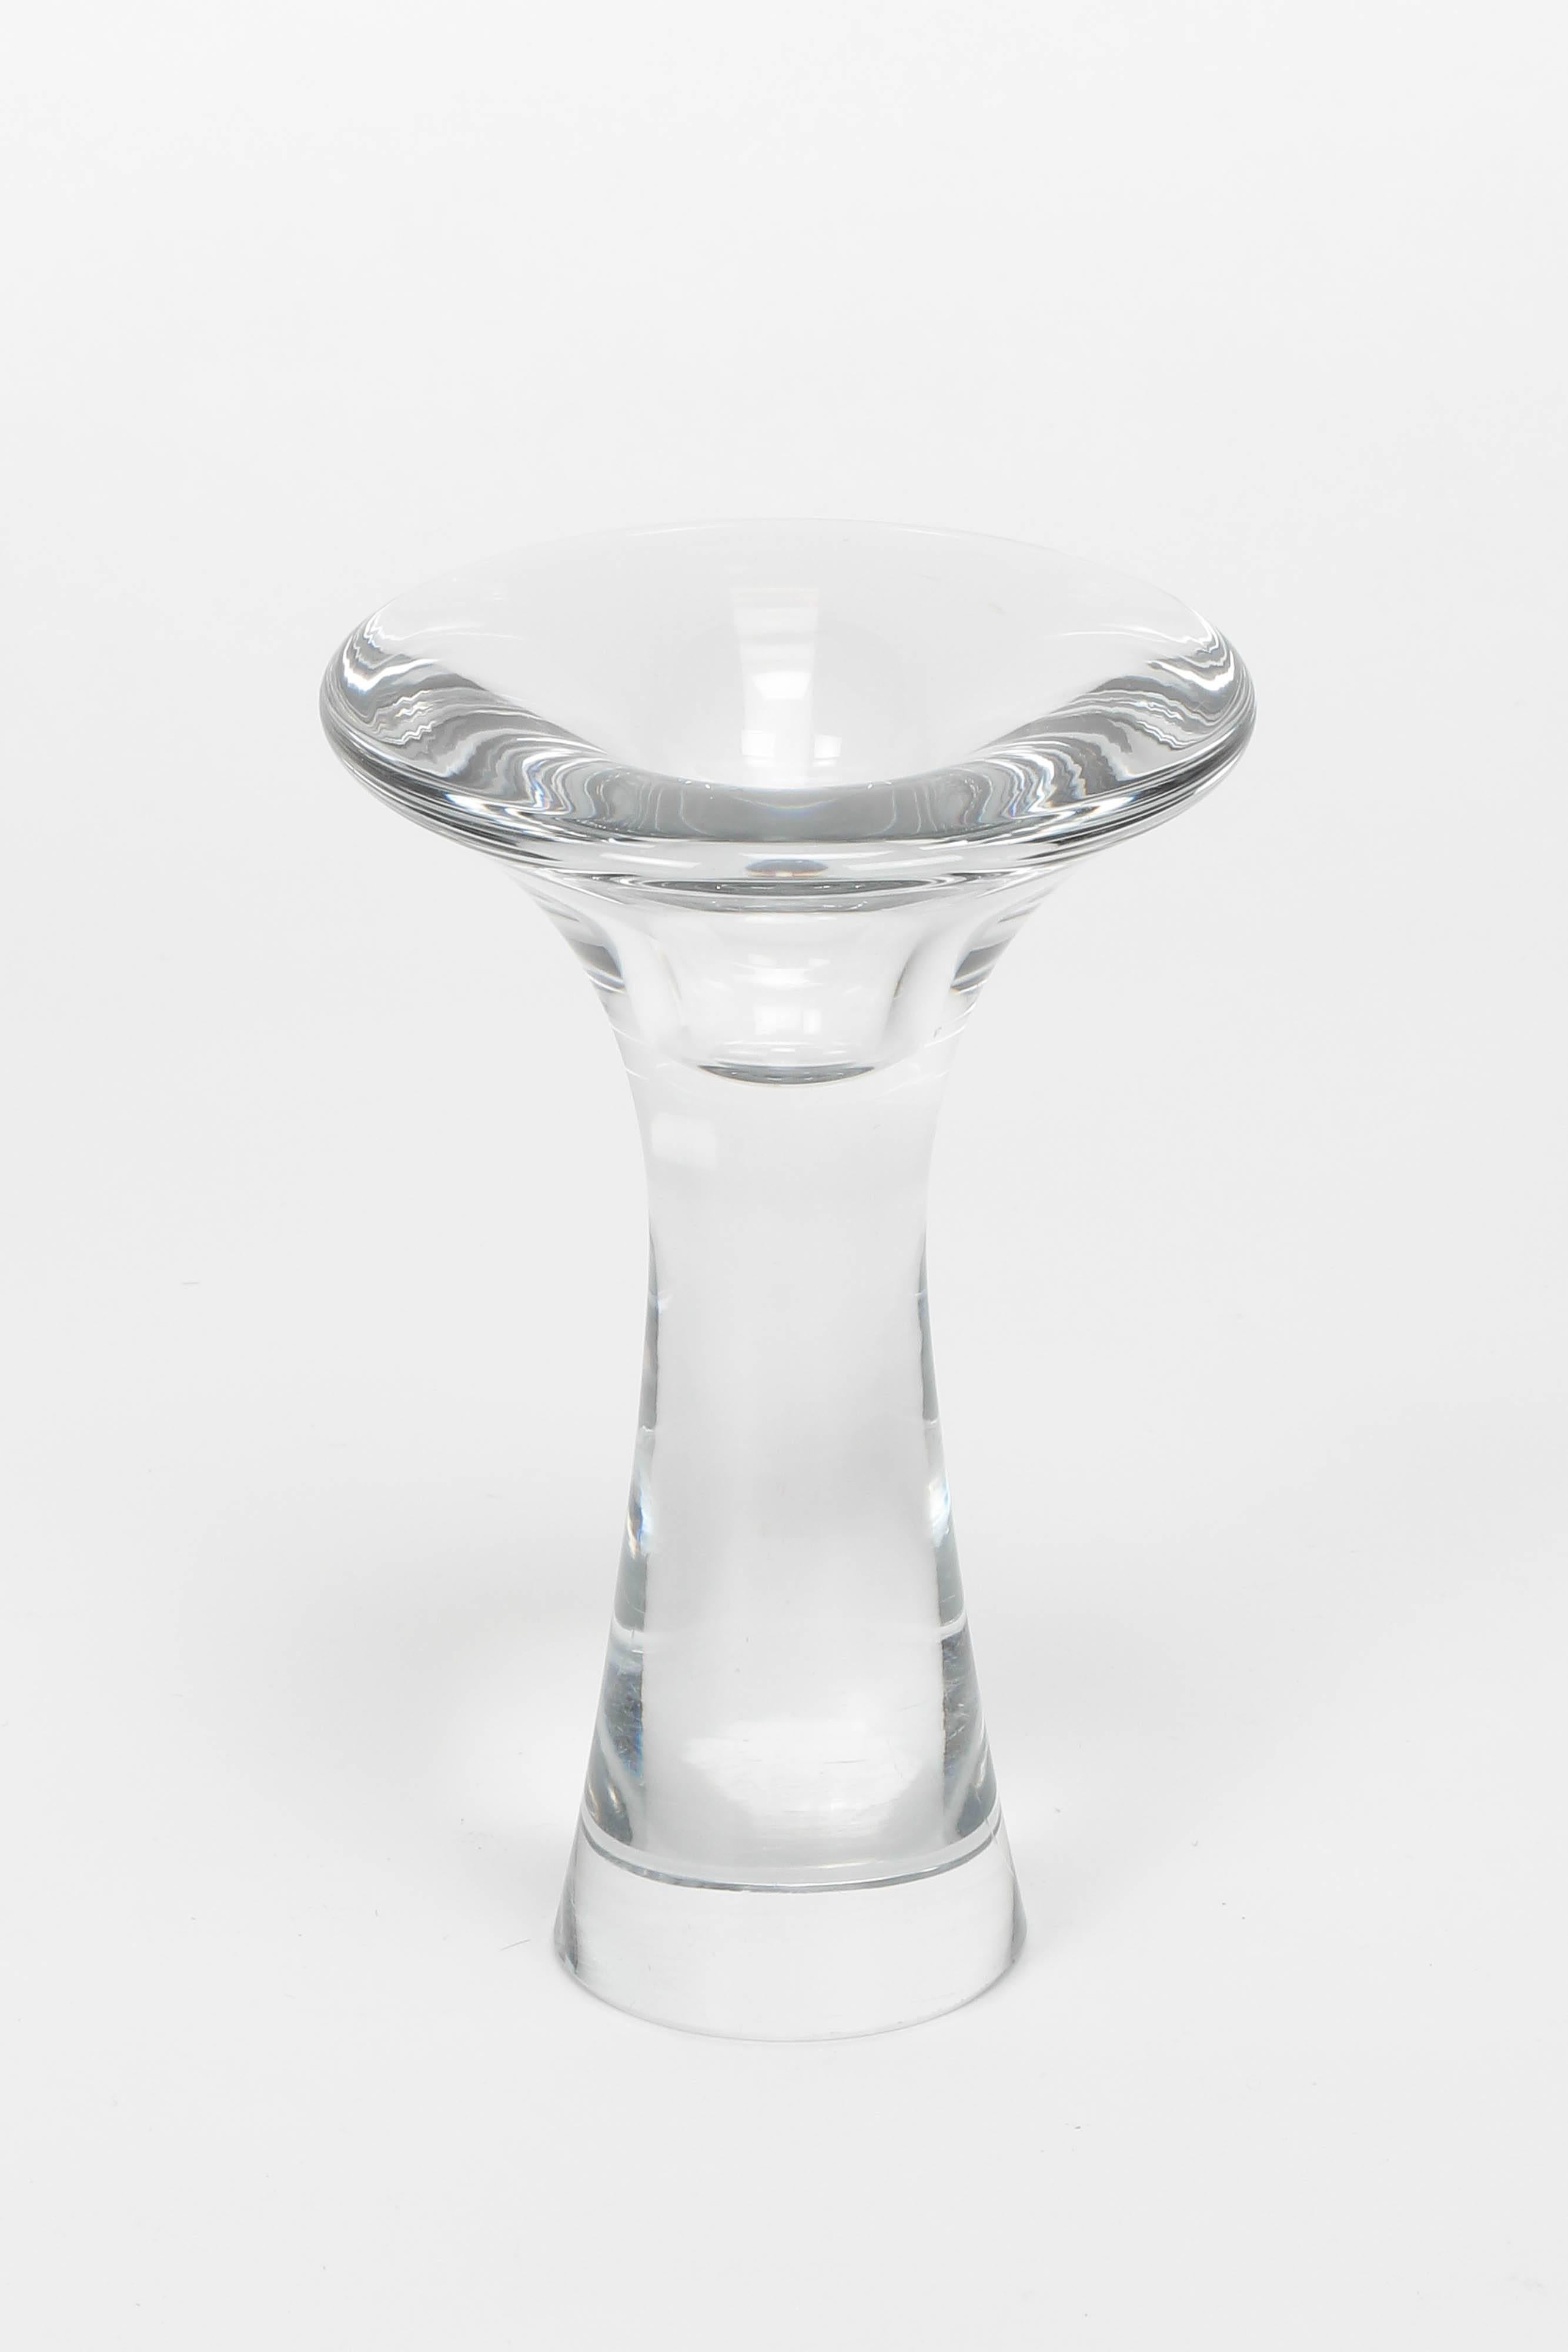 Tapio Wirkkala candlestick n° 3412 designed 1954 and manufactured by Littala until 1971. Crystal glass, minimalistic shape, signed on the upper side.